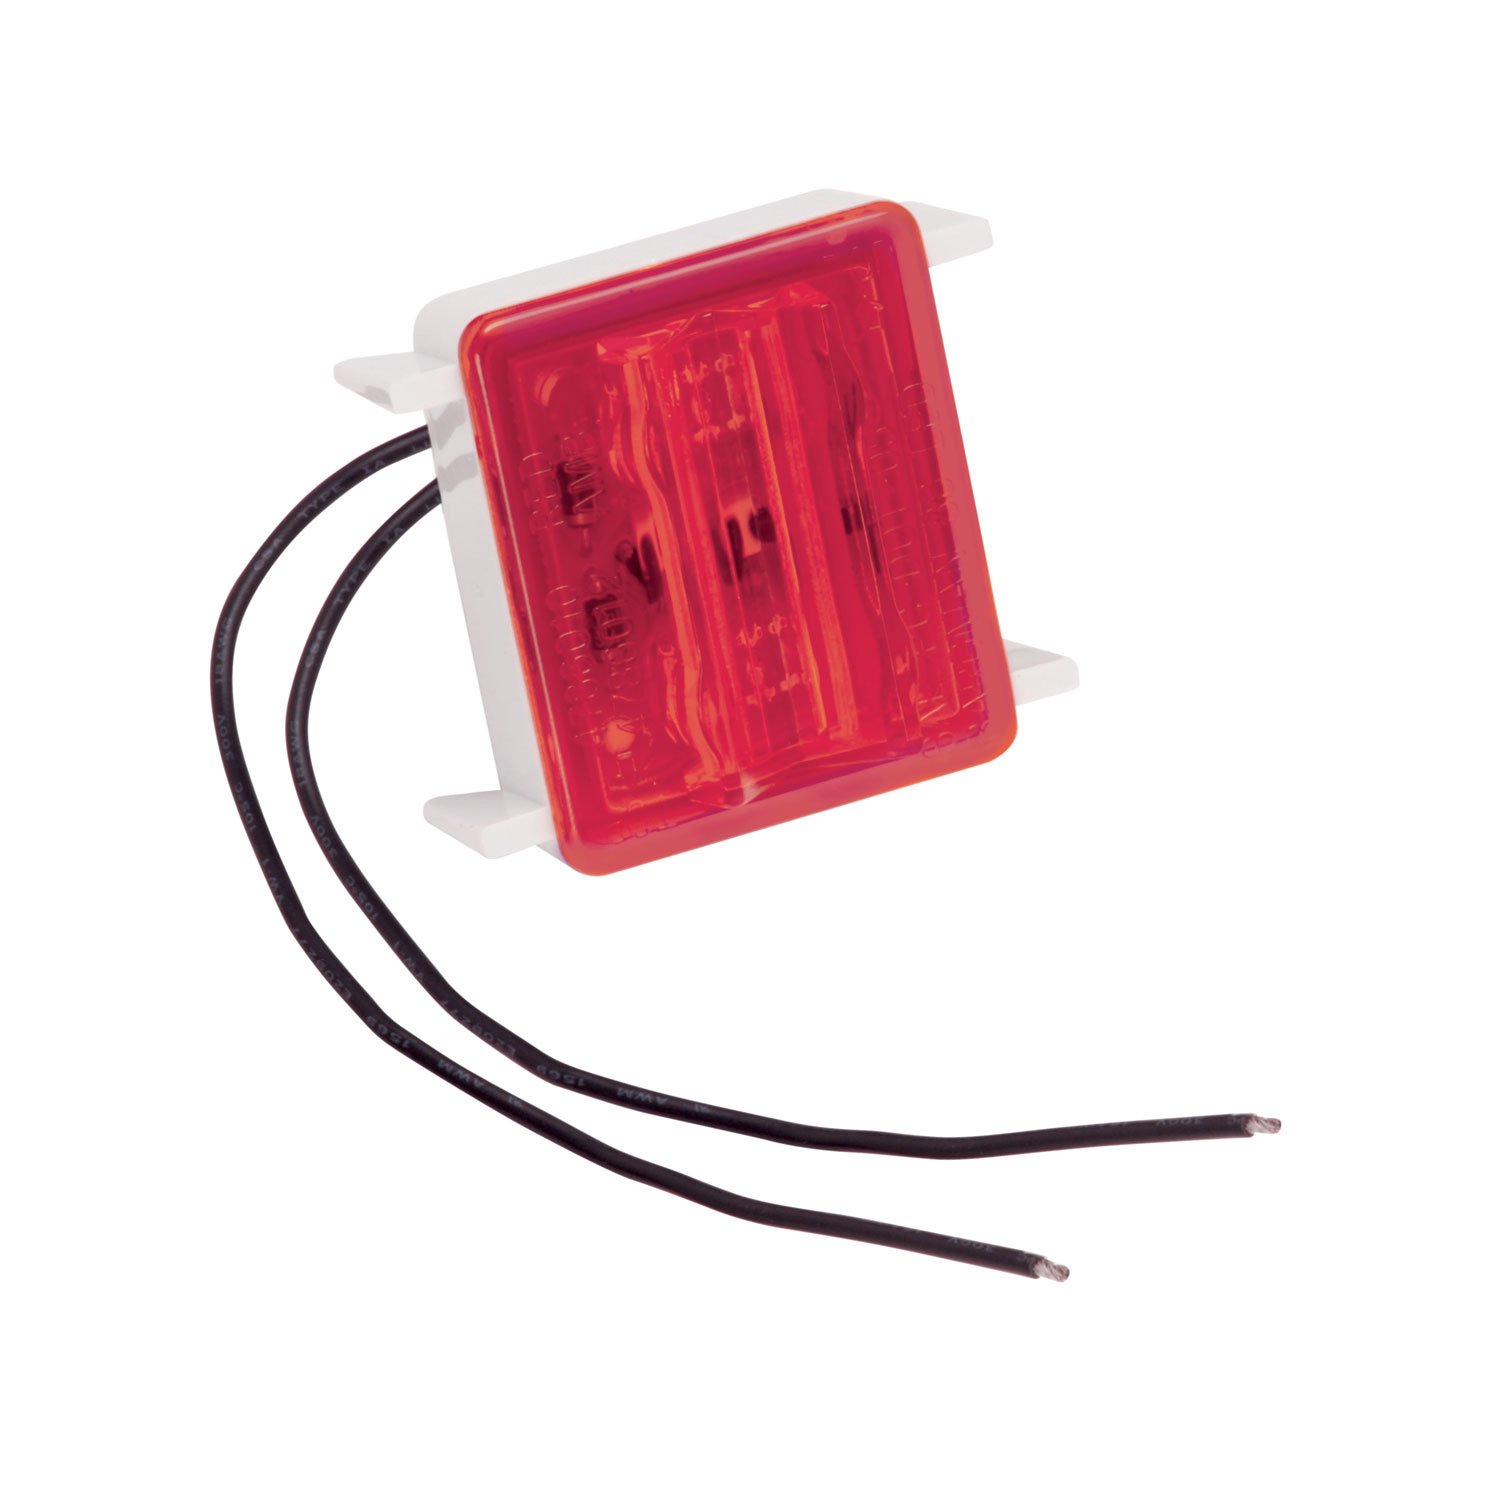 Bargman 42-86-410 LED Upgrade Clearance Light - Red